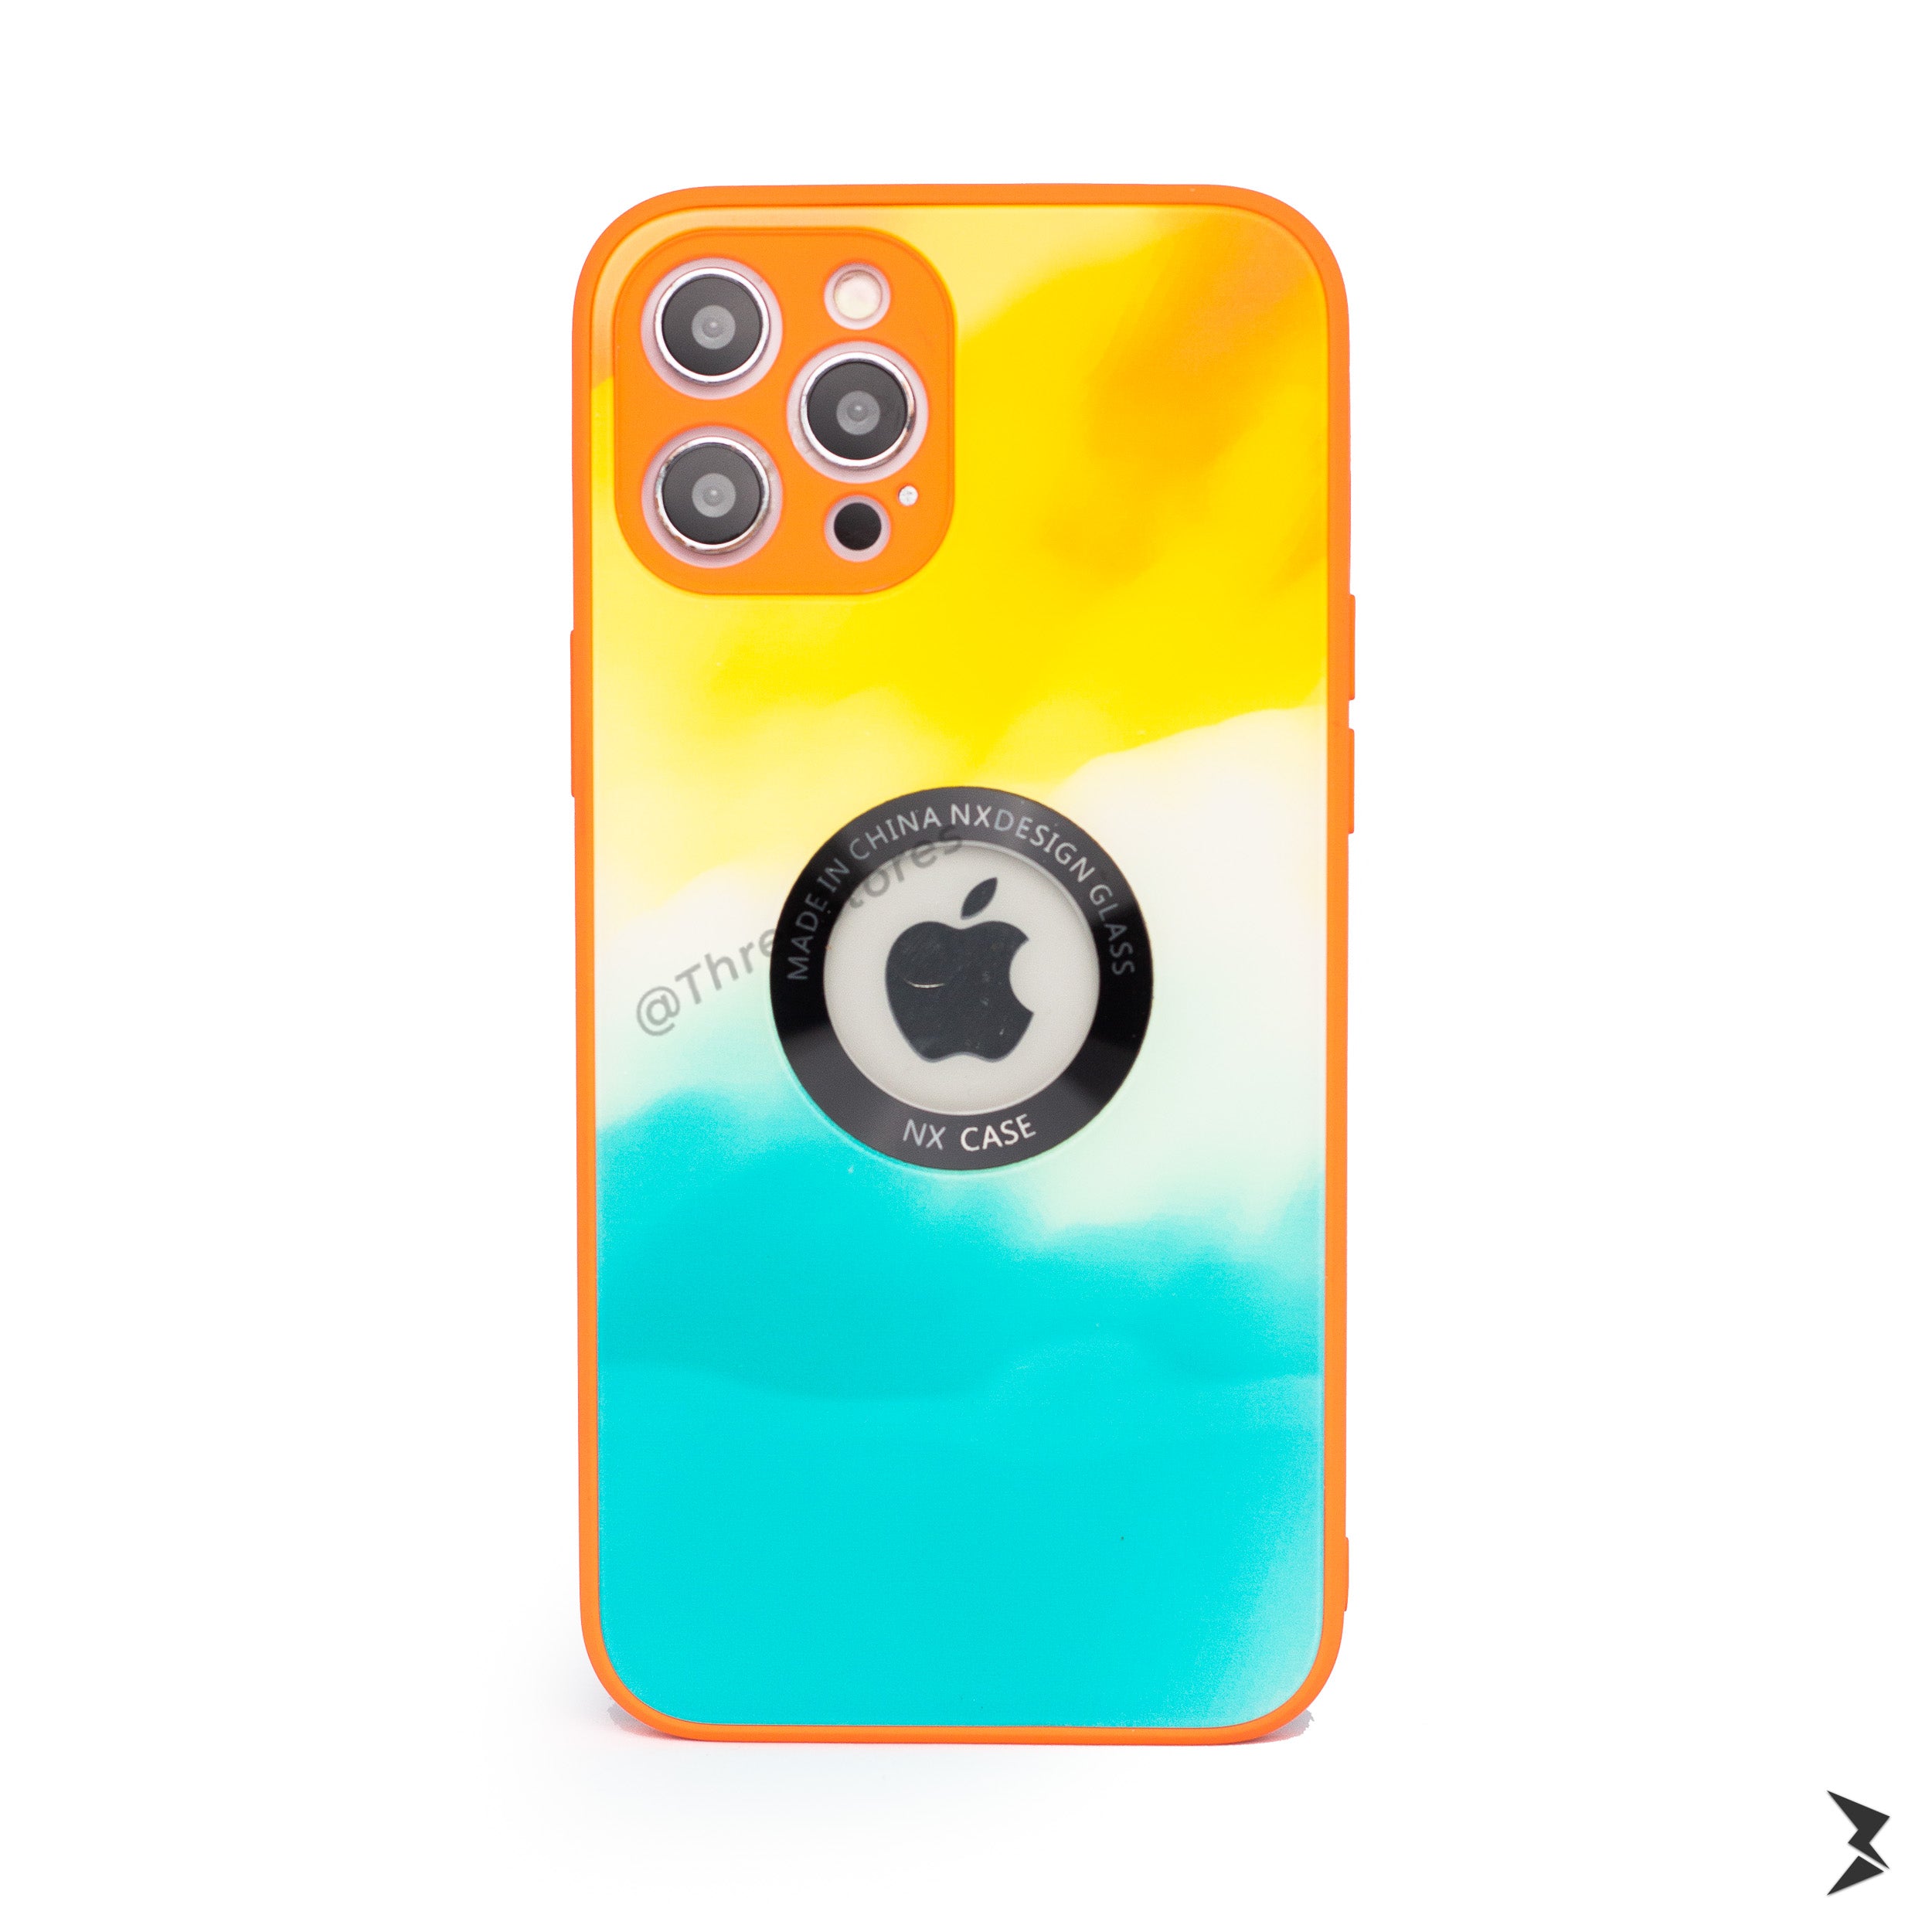 Nx Colorful iPhone 12 pro max case